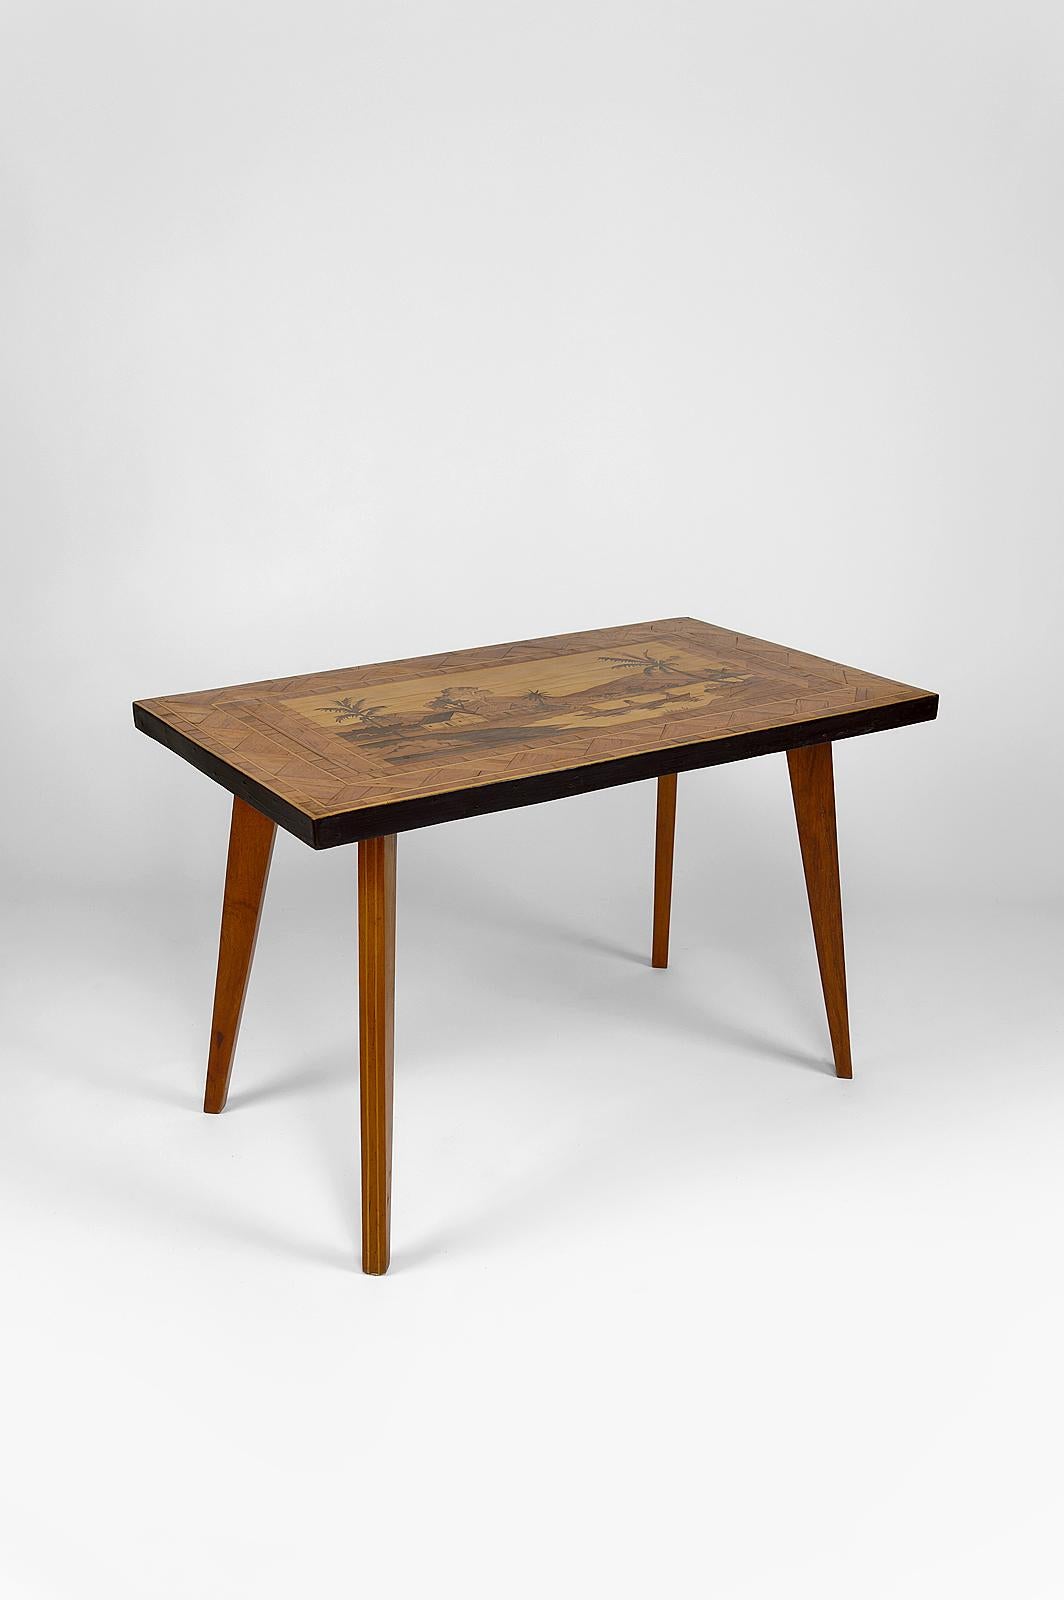 Malagasy African Mid-Century Colonial Coffee Table with Inlaid Wood , circa 1960 For Sale